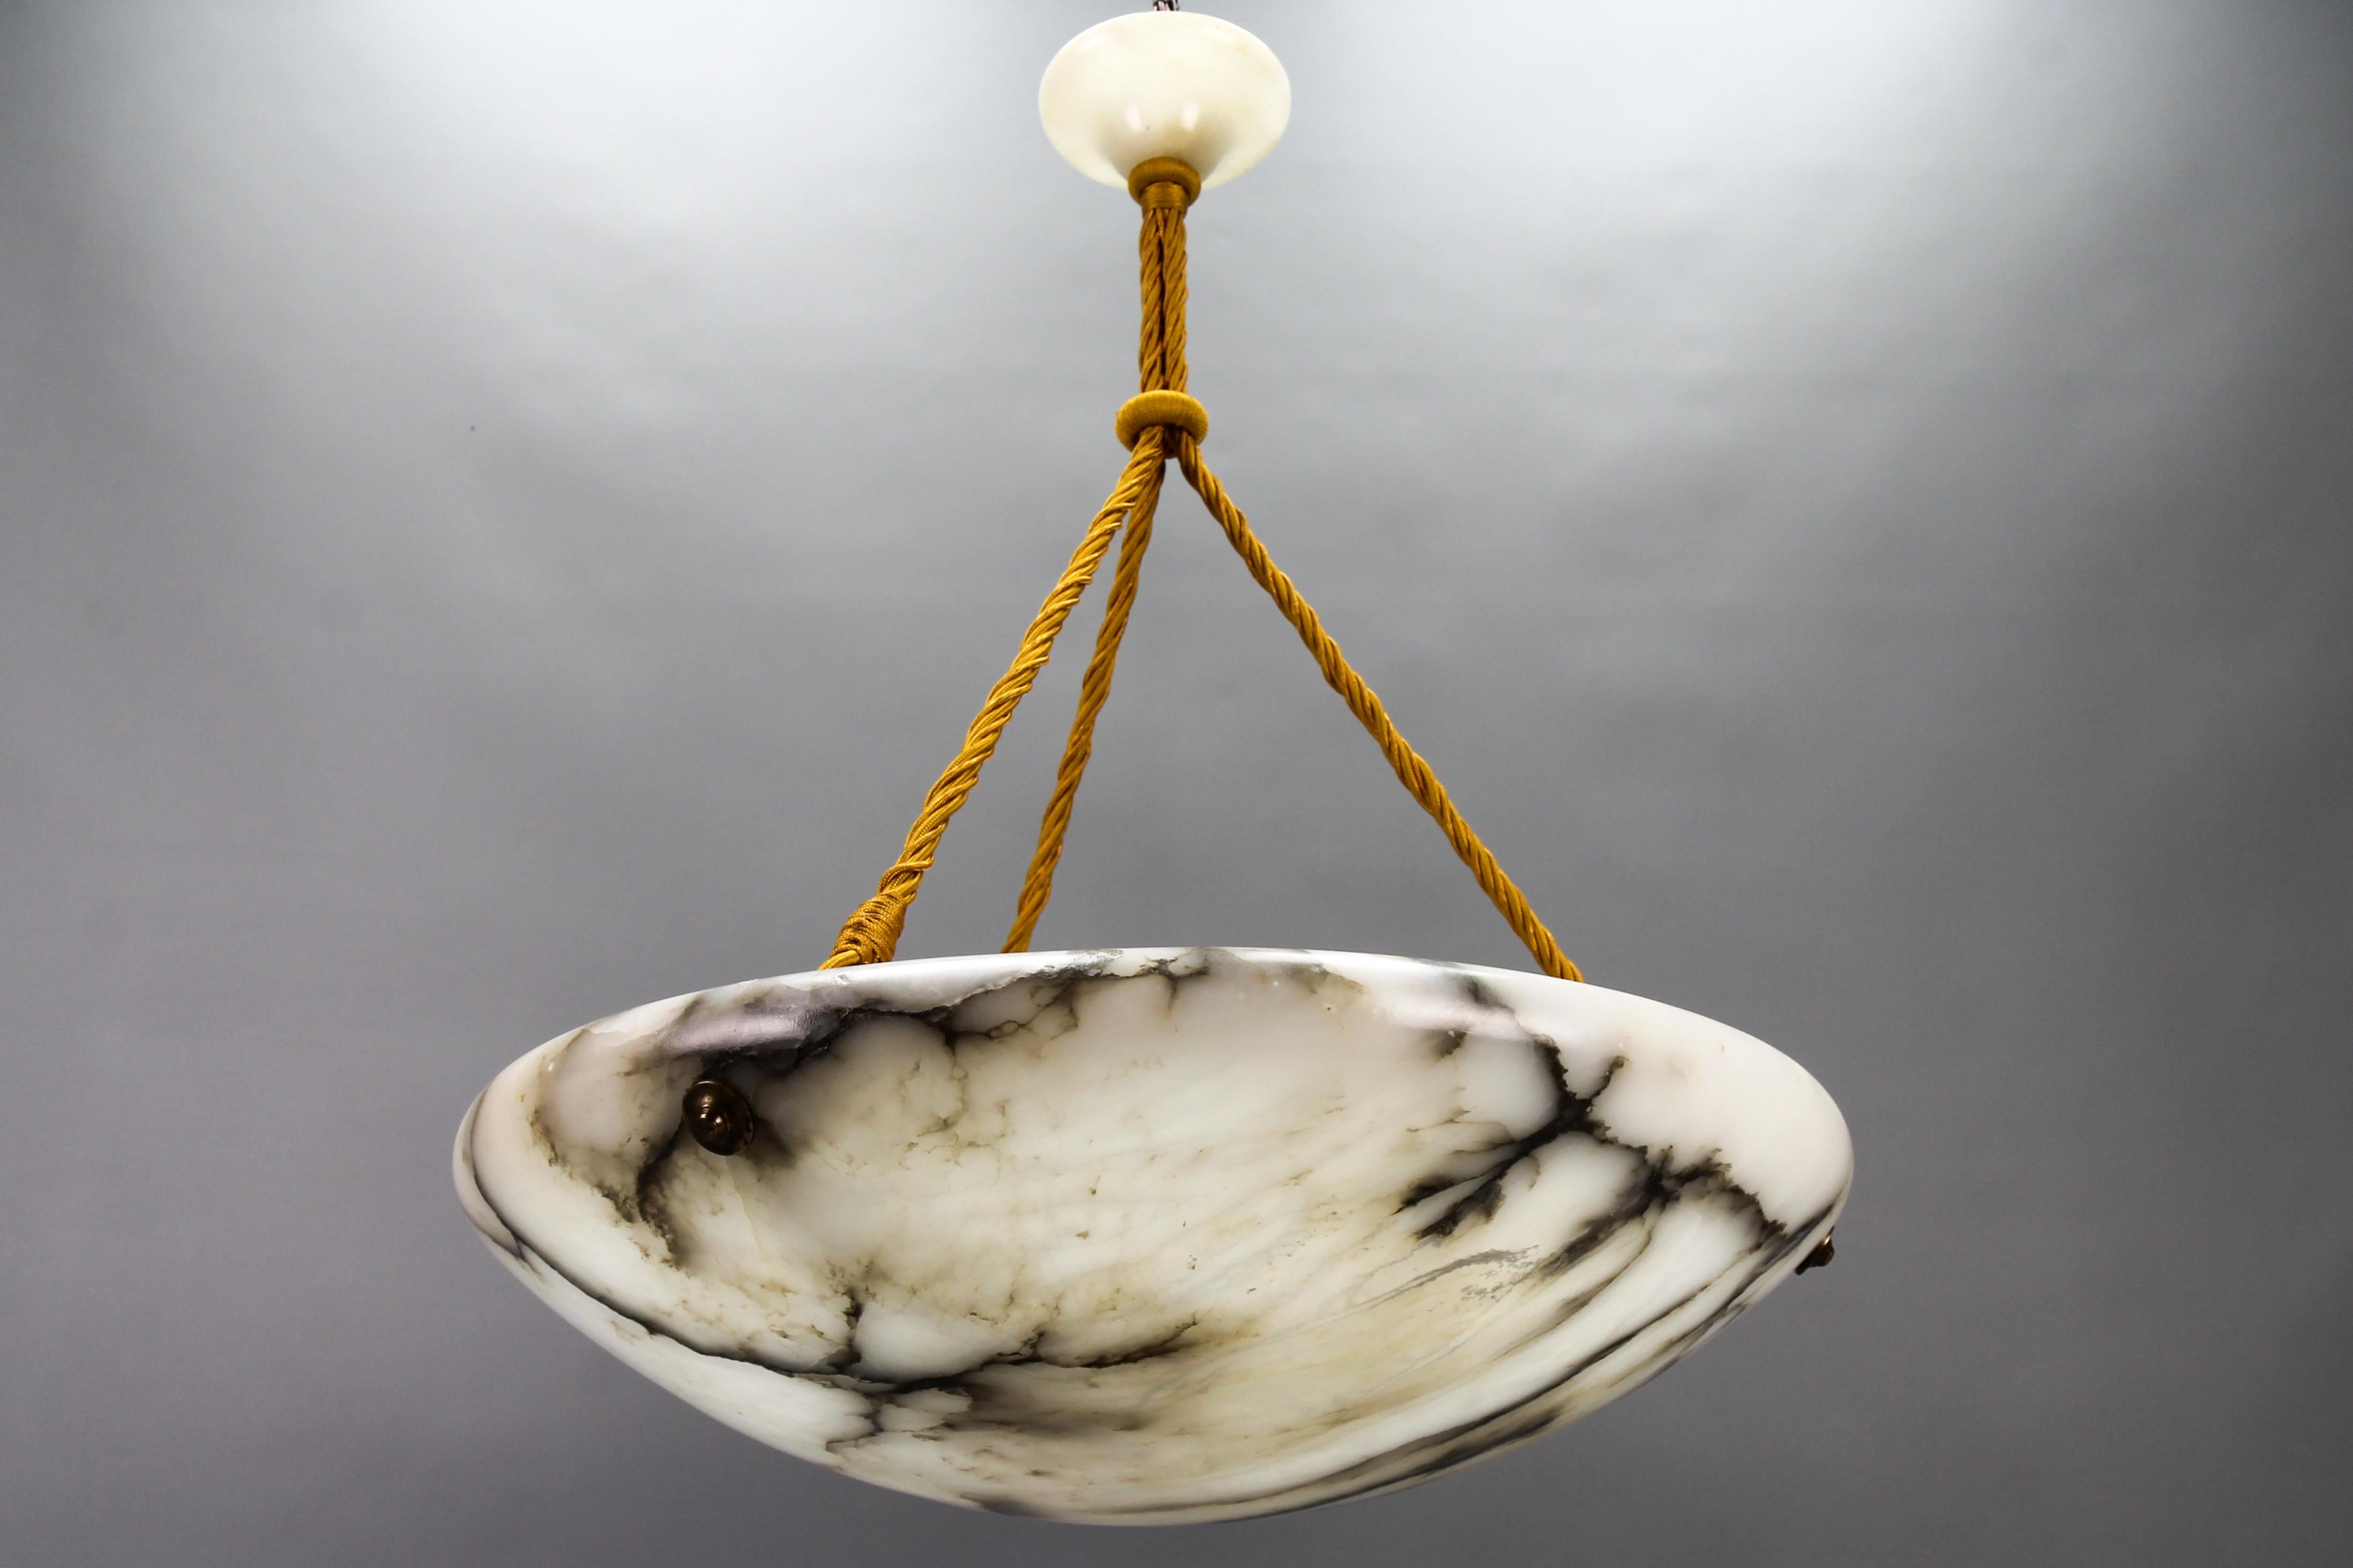 Large Black Veined White and Grey Alabaster Pendant Light Fixture, France, circa the 1920s.
An impressive and wonderful alabaster pendant ceiling light fixture from circa the 1920s. Beautifully veined and masterfully carved white and light grey